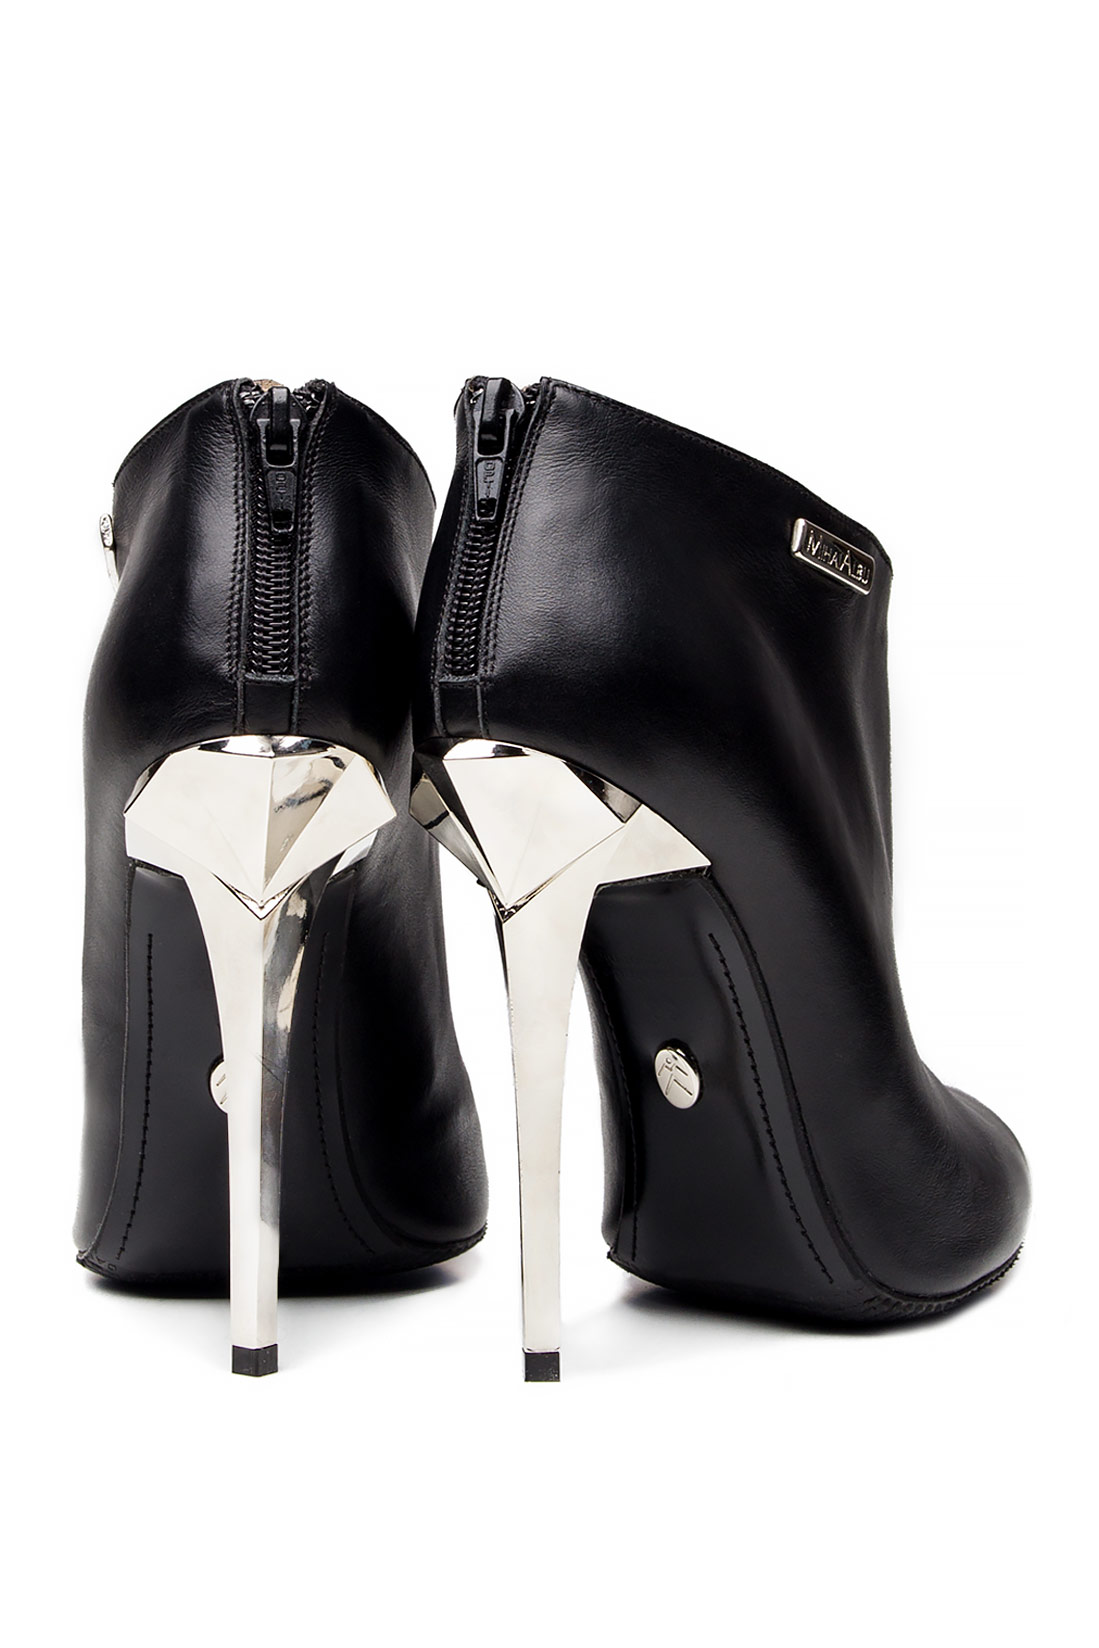 'STEALTH' leather ankle boots Mihai Albu image 2